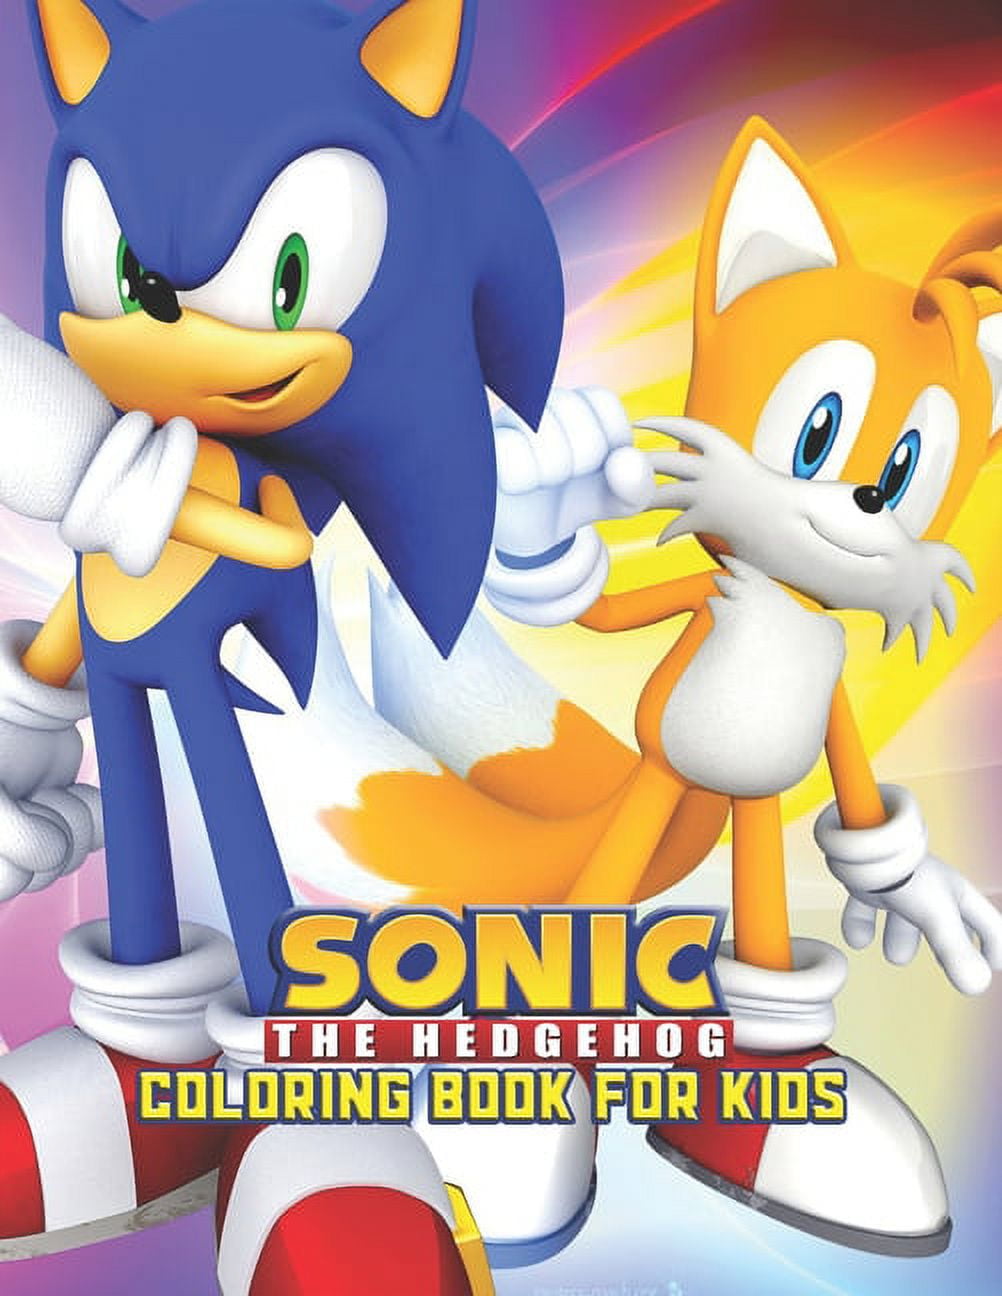  42Pack Sonic Coloring Books for Kids 4-8, Small Coloring Books  for Kids Ages 2-4, Bulk Coloring Books Sonic Party Favors Birthday Gifts  Classroom Activity Supplies Christmas Stuffer Filler Goodie Bags 